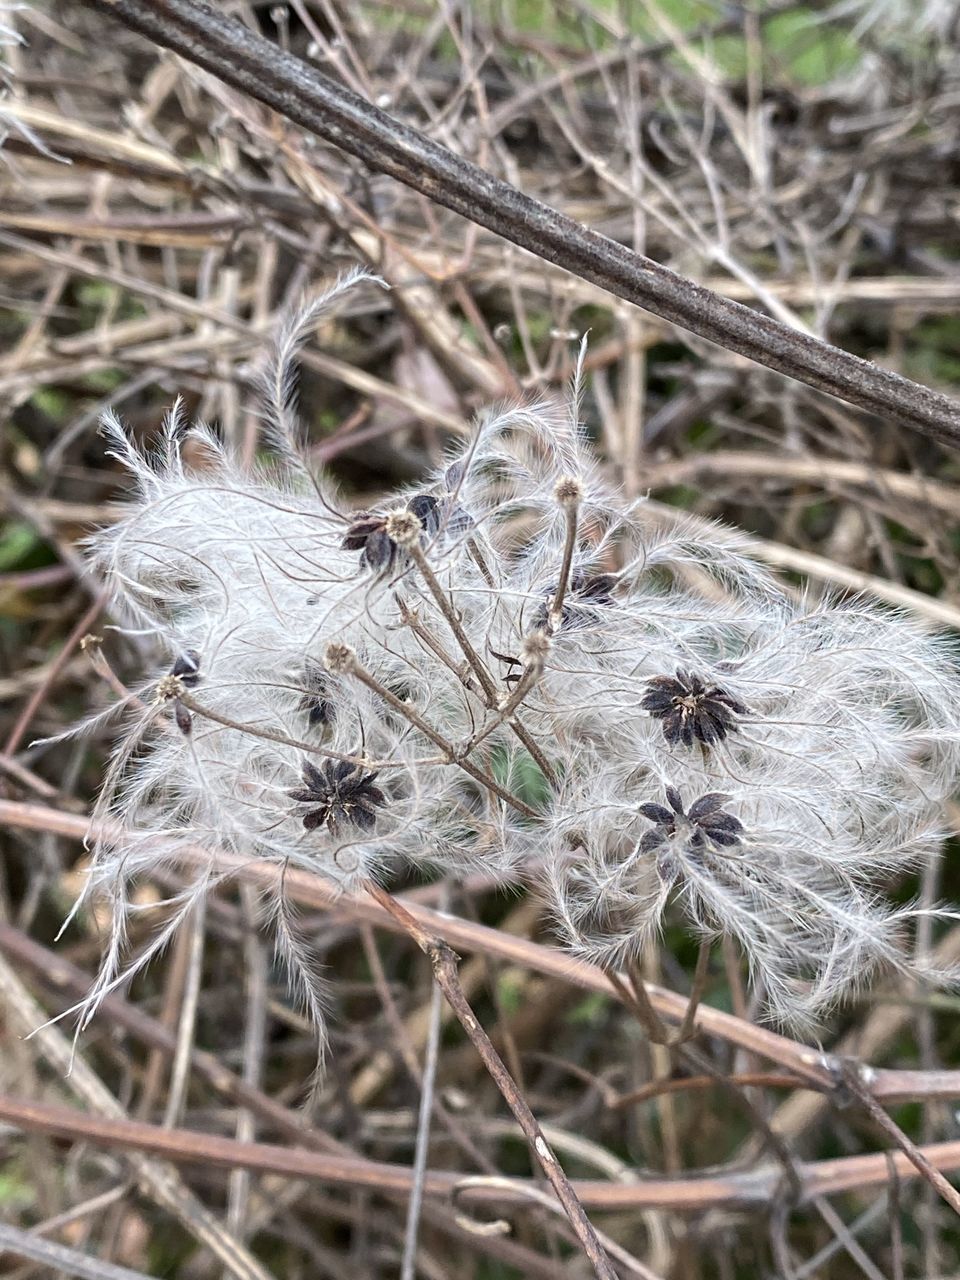 CLOSE-UP OF DRIED PLANT ON LAND